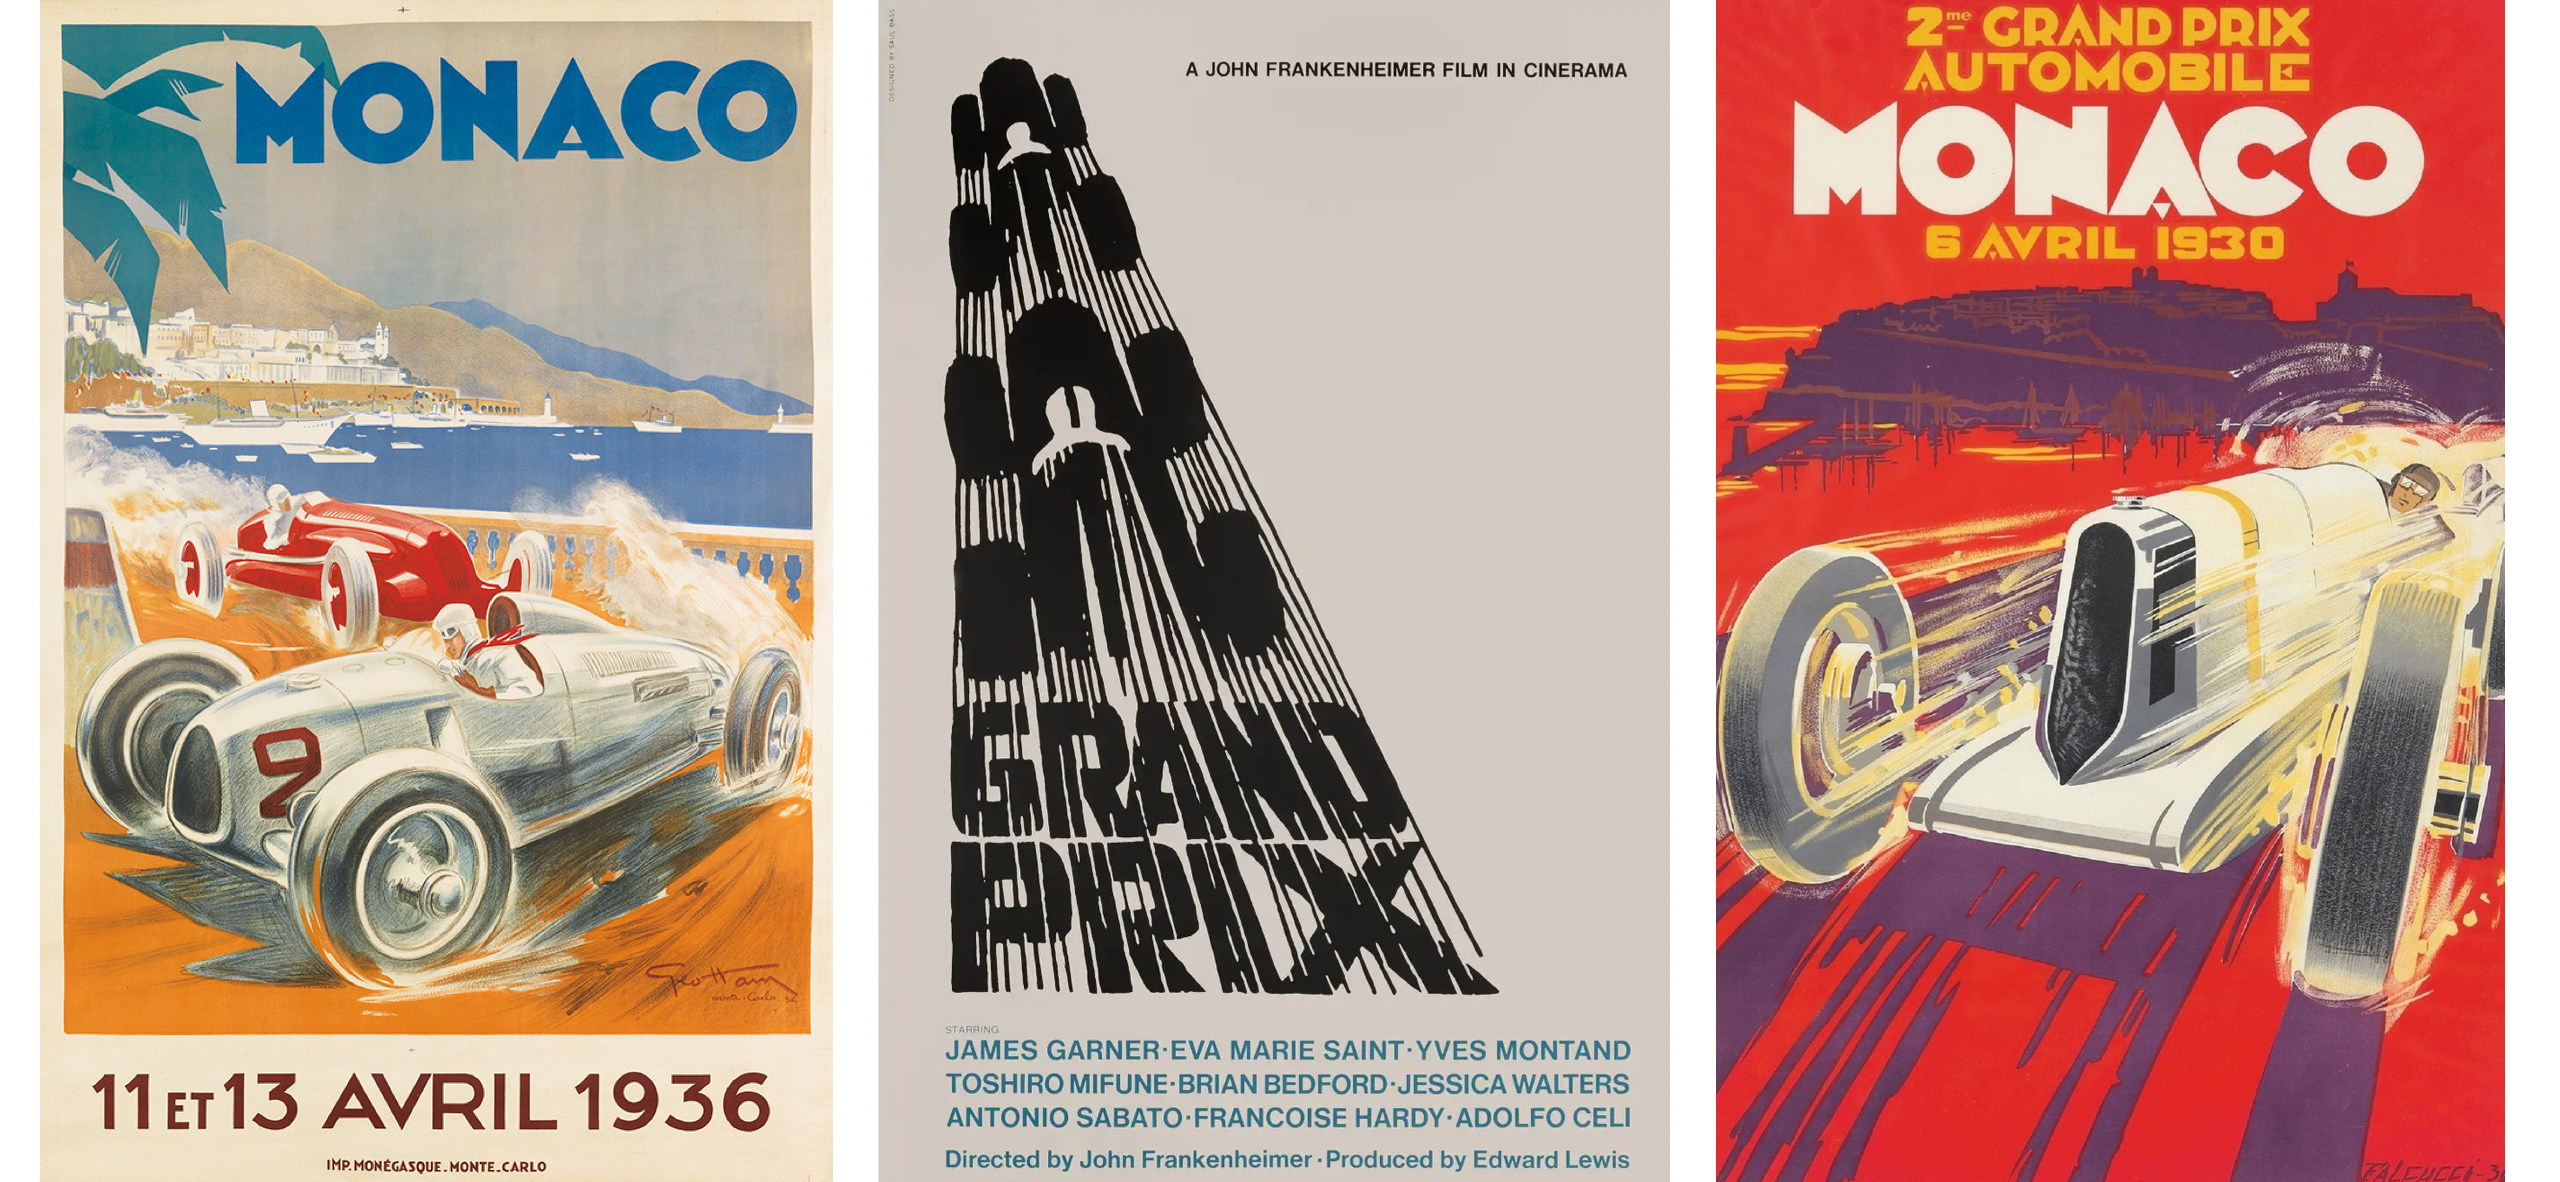 <div class="10-col-caption"><span><strong>RARE FINDS</strong></span><br/><span>From left:  Ham depicts the battle between an Auto Union GL and an Alfa Romeo; Bass chooses abstraction over Art Deco for the movie poster of <em>Grand Prix</em>; Falcucci captures a duel between day and night. </span><br/><span class="caption-sub"><em>Art Deco era posters courtesy of Tomkinson Churcher.</em> </span><br/></div>